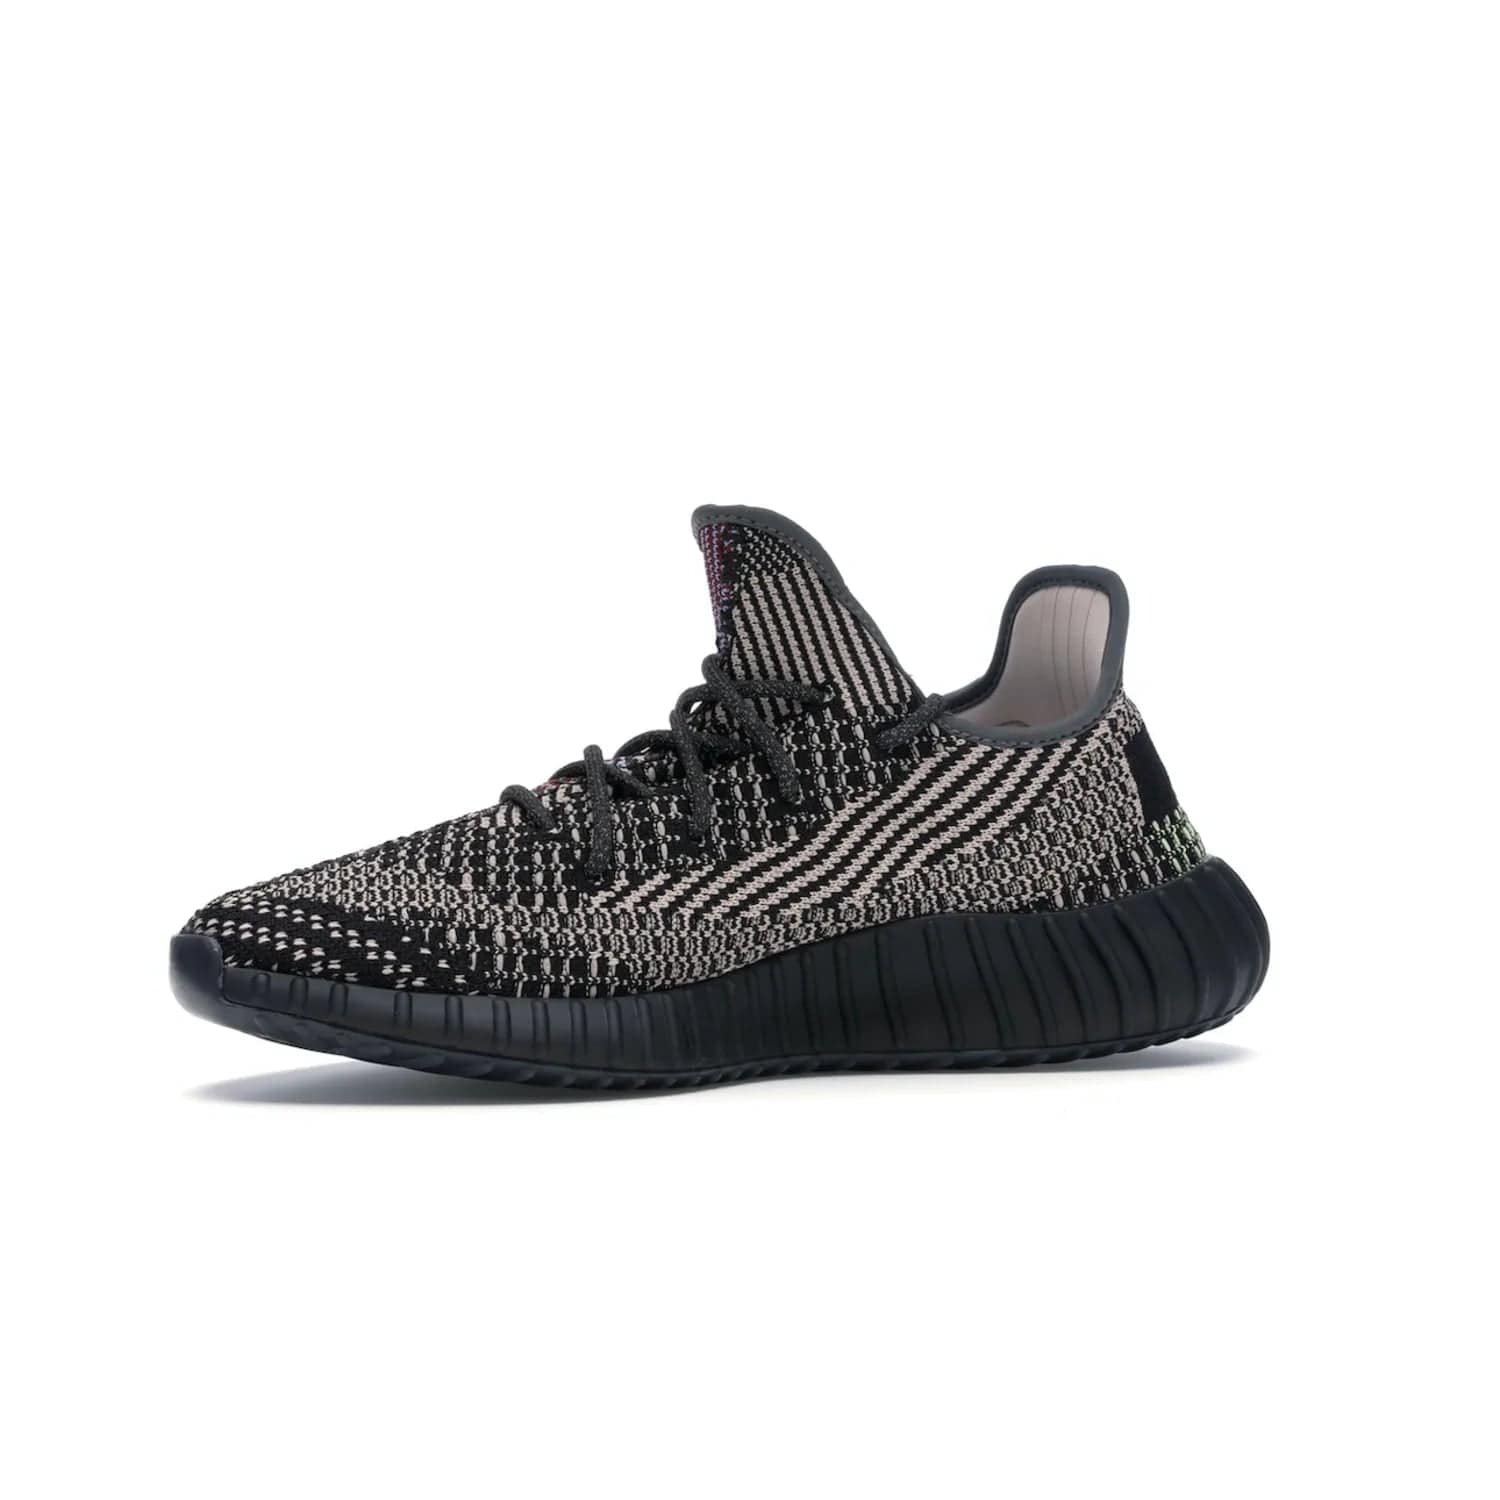 adidas Yeezy Boost 350 V2 Yecheil (Non-Reflective) - Image 17 - Only at www.BallersClubKickz.com - Make a statement with the eye-catching adidas Yeezy Boost 350 V2 Yecheil Non-Reflective. Featuring a spectrum of colorful hues, black upper, Boost cushioning, and black side stripe, the sneaker brings a luxe yet playful finish to any outfit.